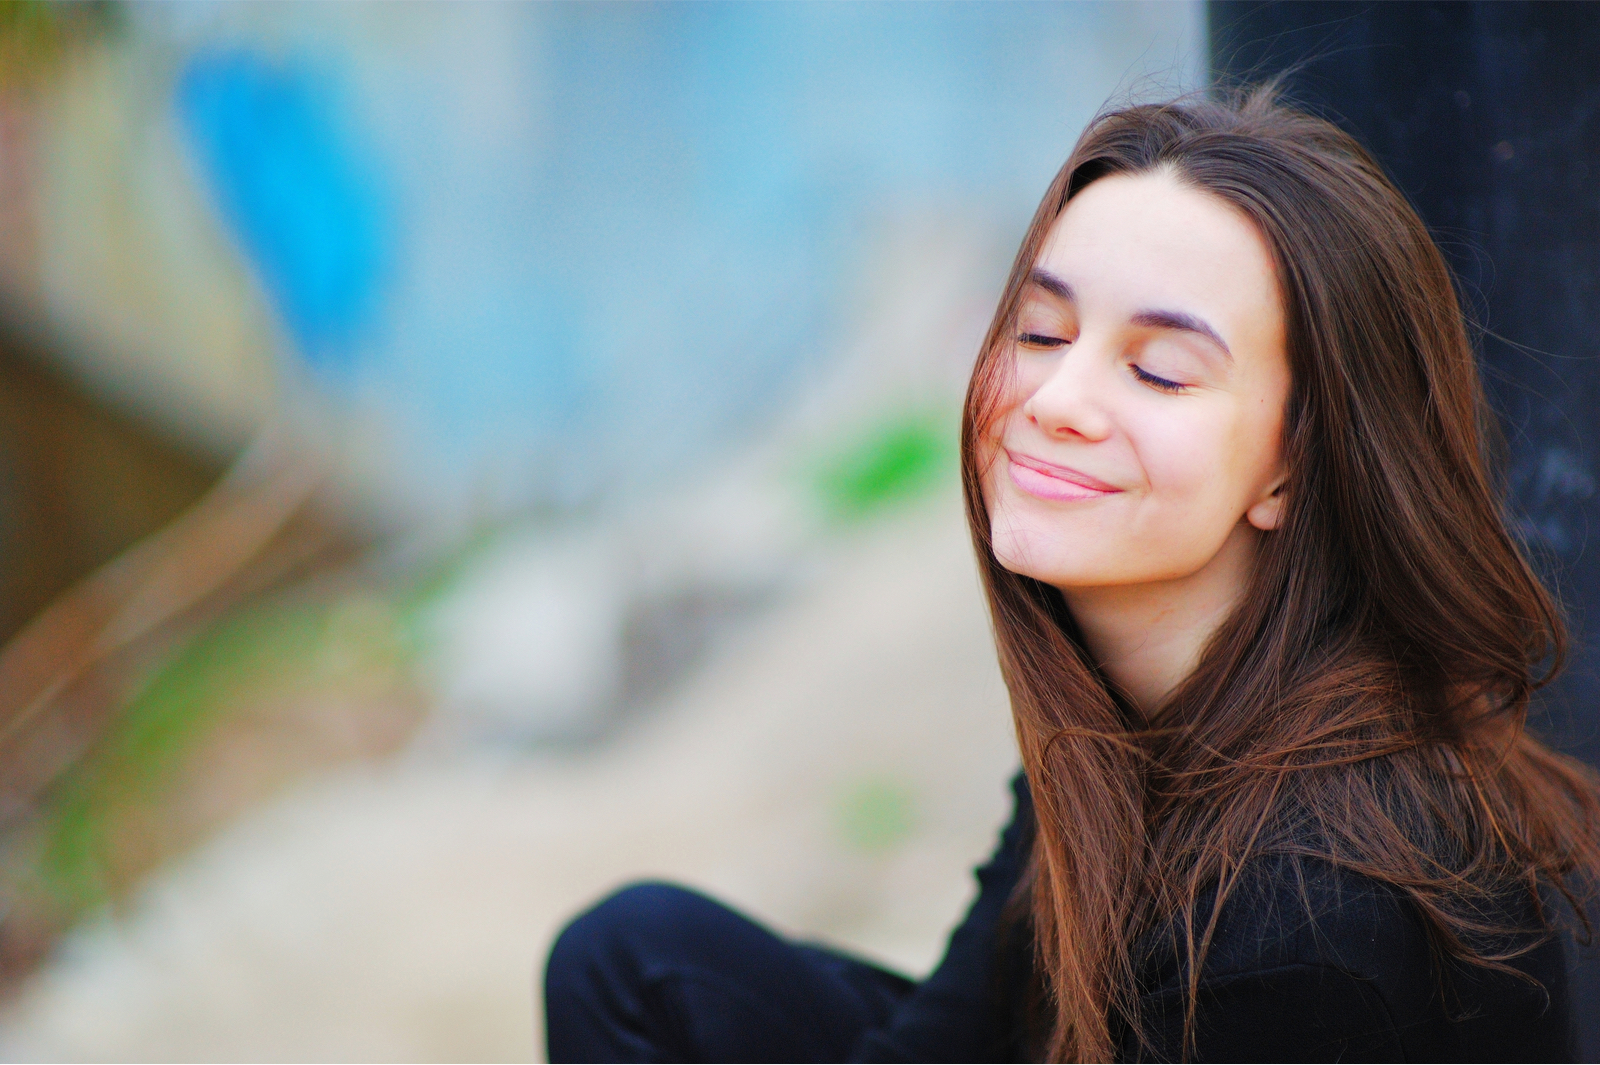 web2-portrait-of-a-dreamy-beautiful-woman-on-the-street-with-your-eyes-closed-and-a-cute-smile-on-blurred-background-close-up-shutterstock_567663493.jpg